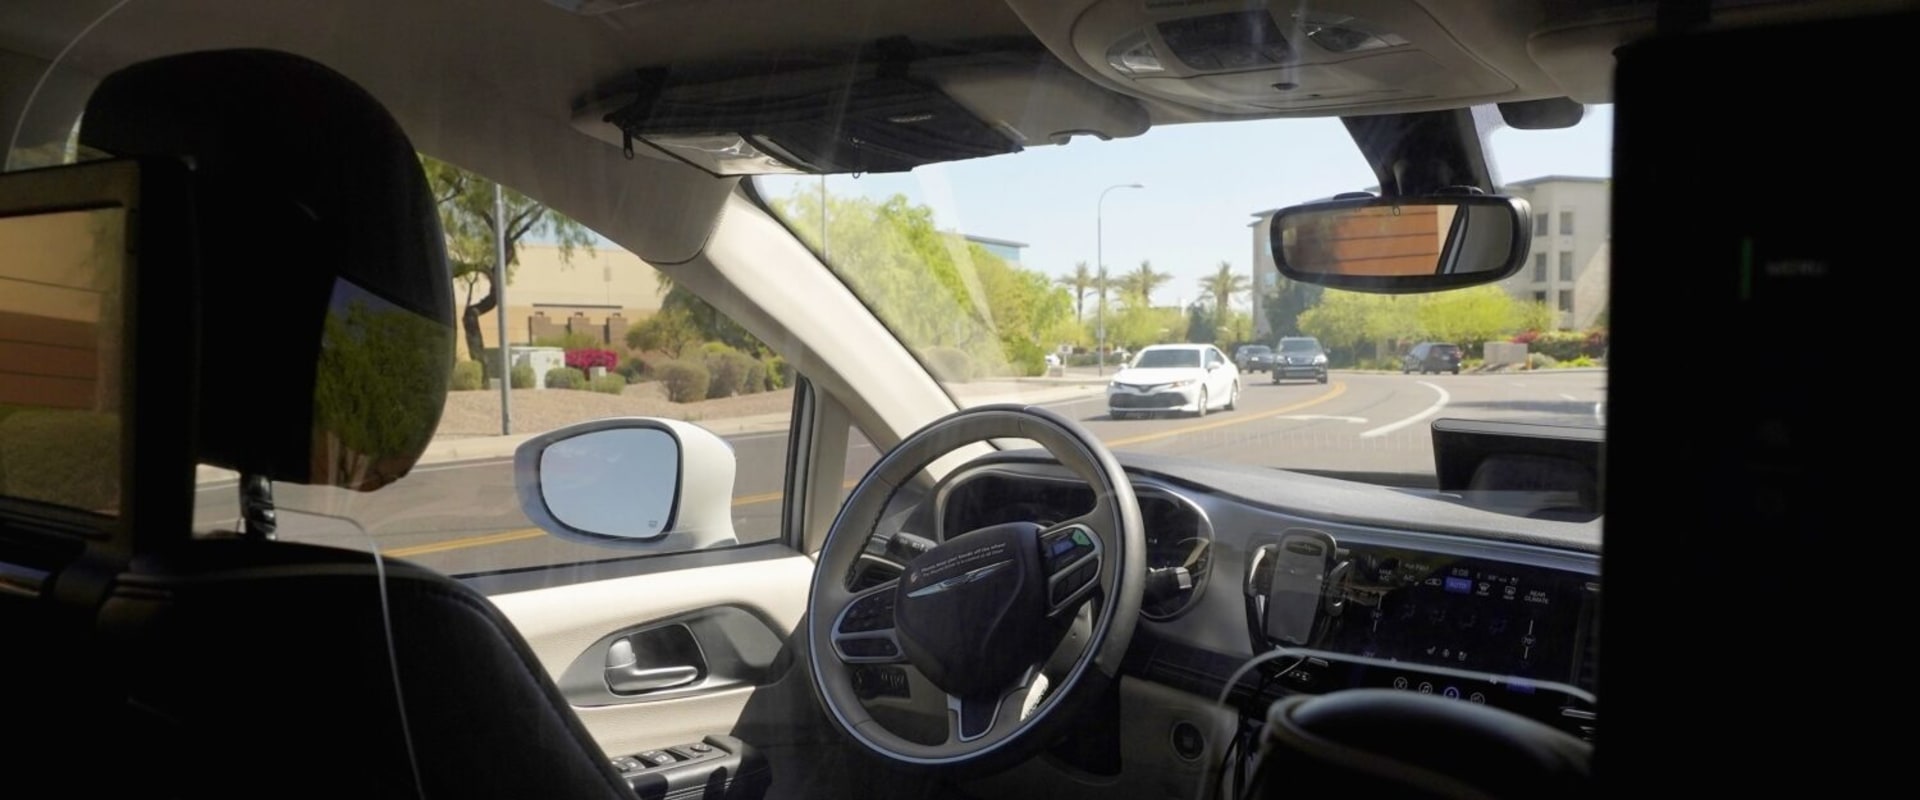 Understanding Advanced Driver Assistance Systems Used by Ubers in Arizona